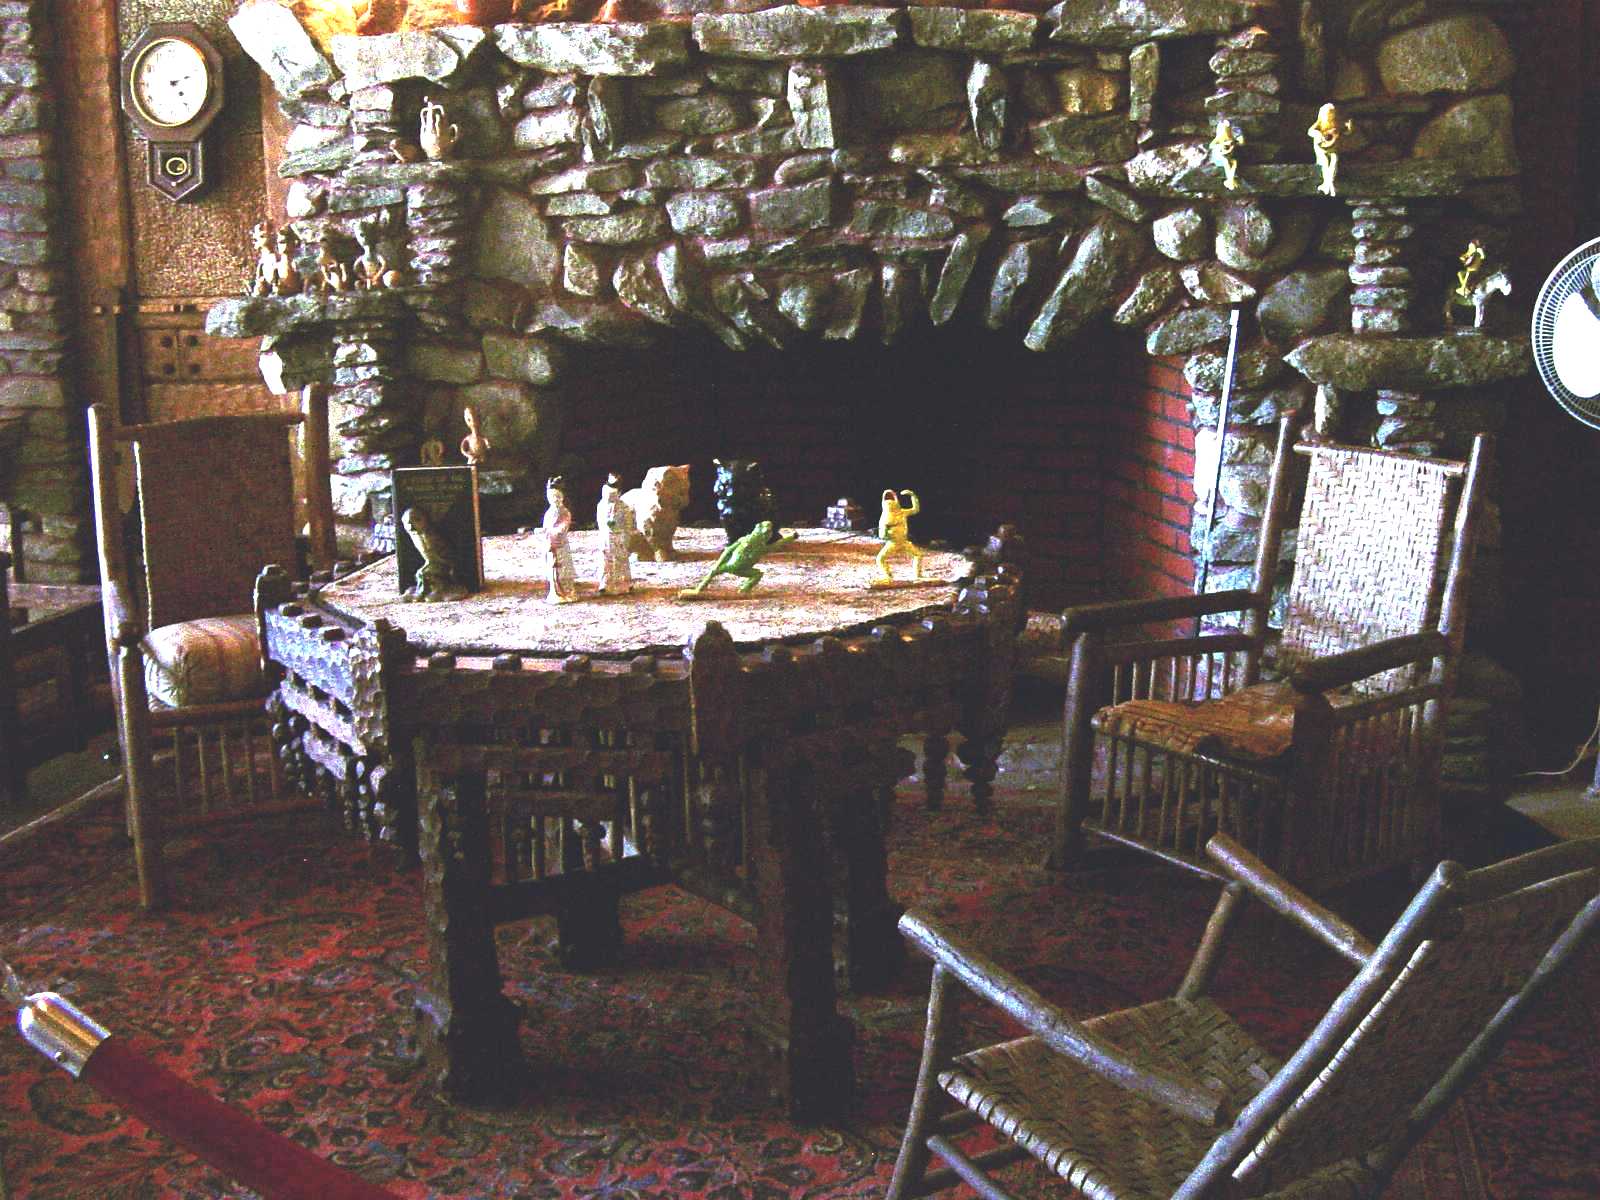 Table by fireplace in main room